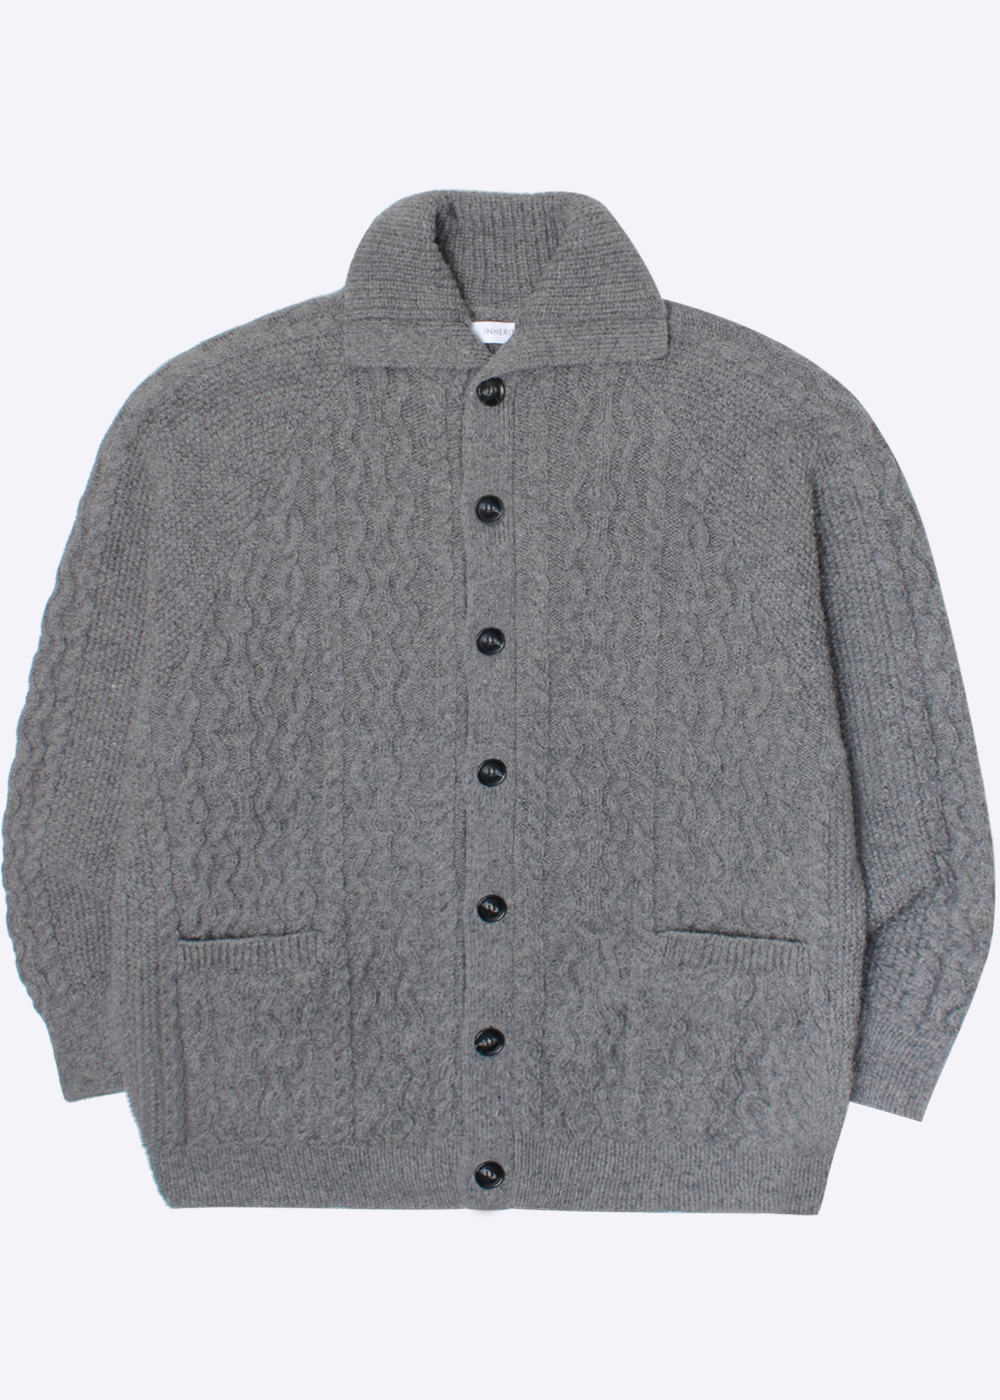 INHERIT BY JOURNAL STANDARD’over fit’heavy wool knit cardigan